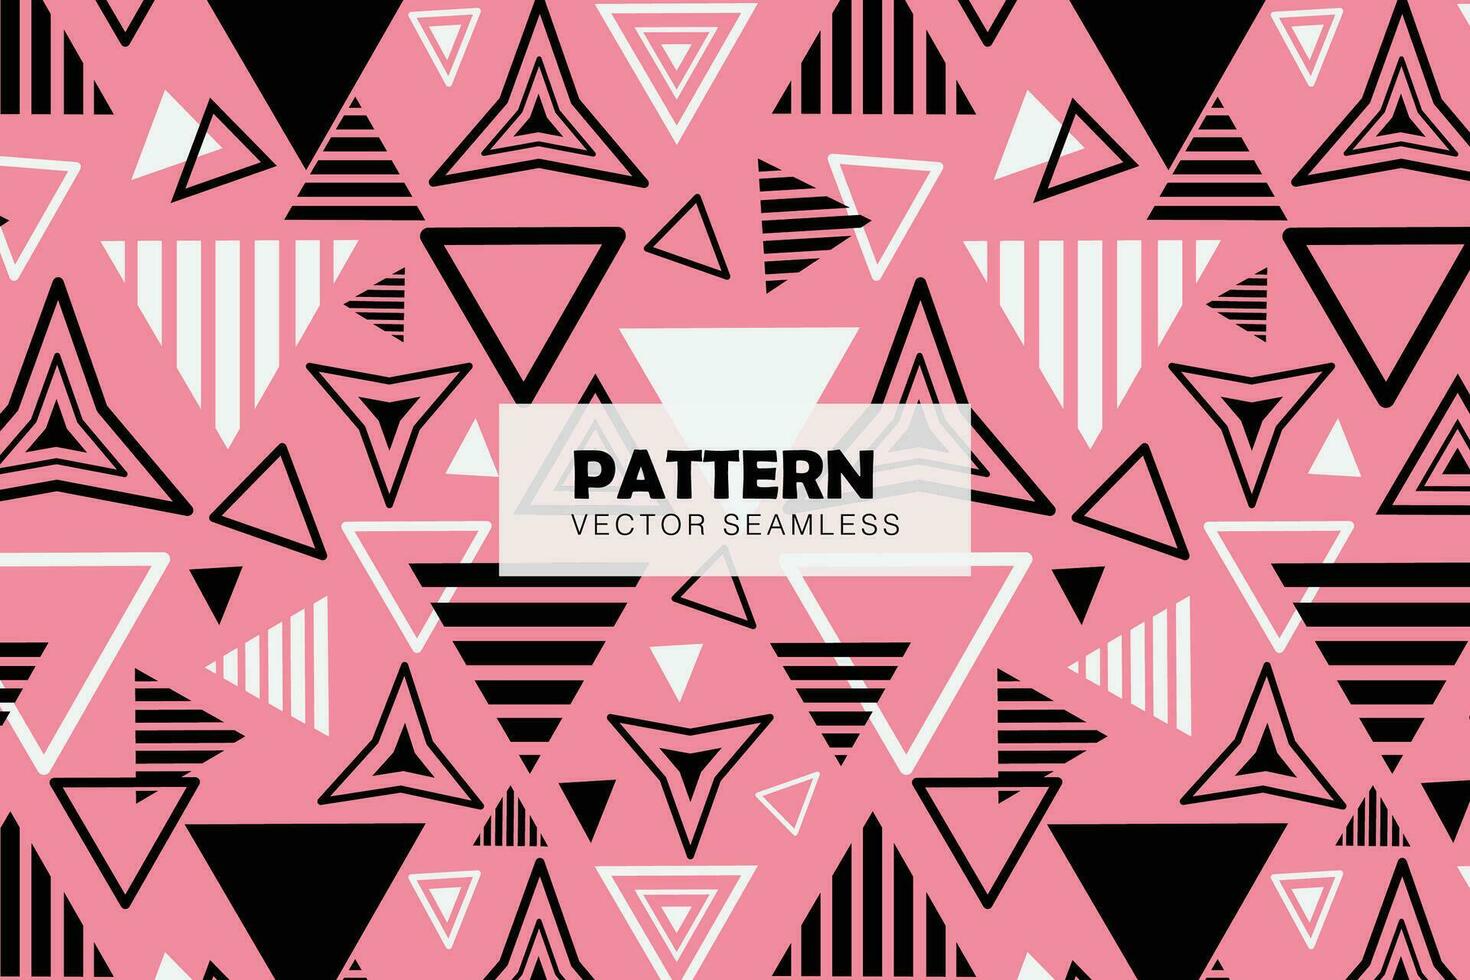 Geometrical triangle shapes abstract seamless repeat pattern vector